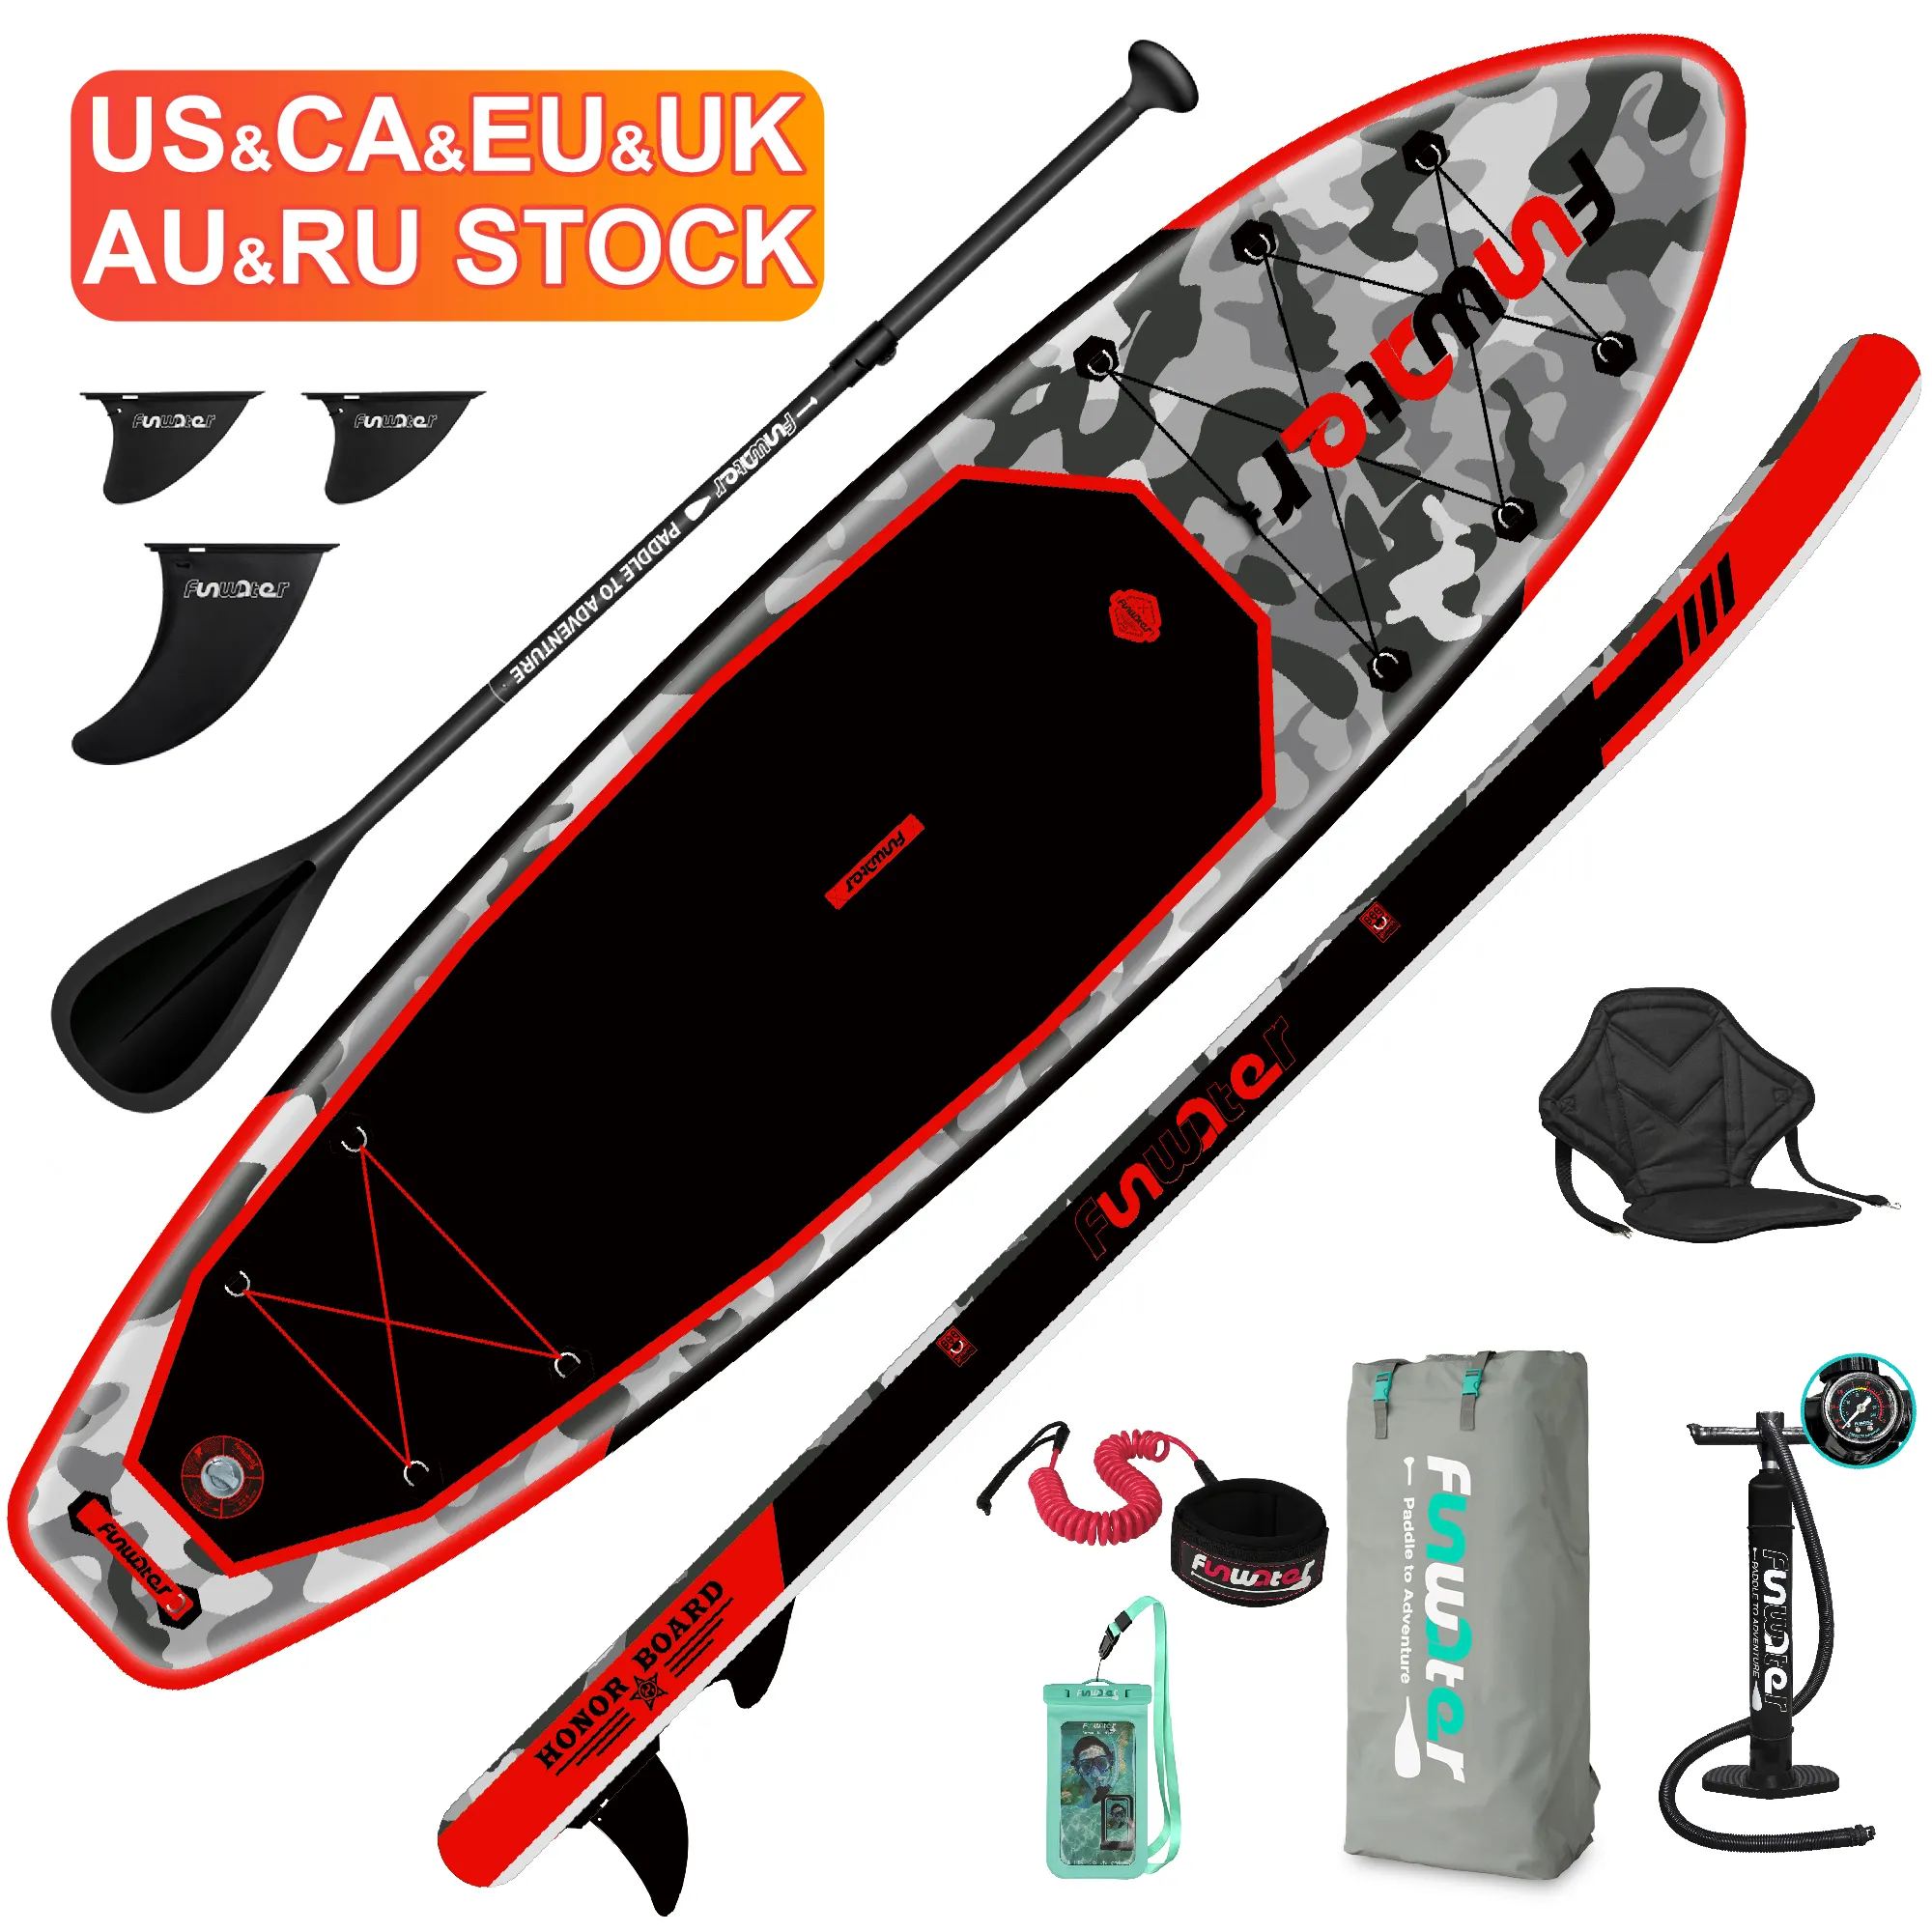 FUNWATER Drops hipping OEM China Lieferant Surfbrett aufblasbares Sup Board Carbon Paddle Board aufblasbares Stand Up Paddle Board